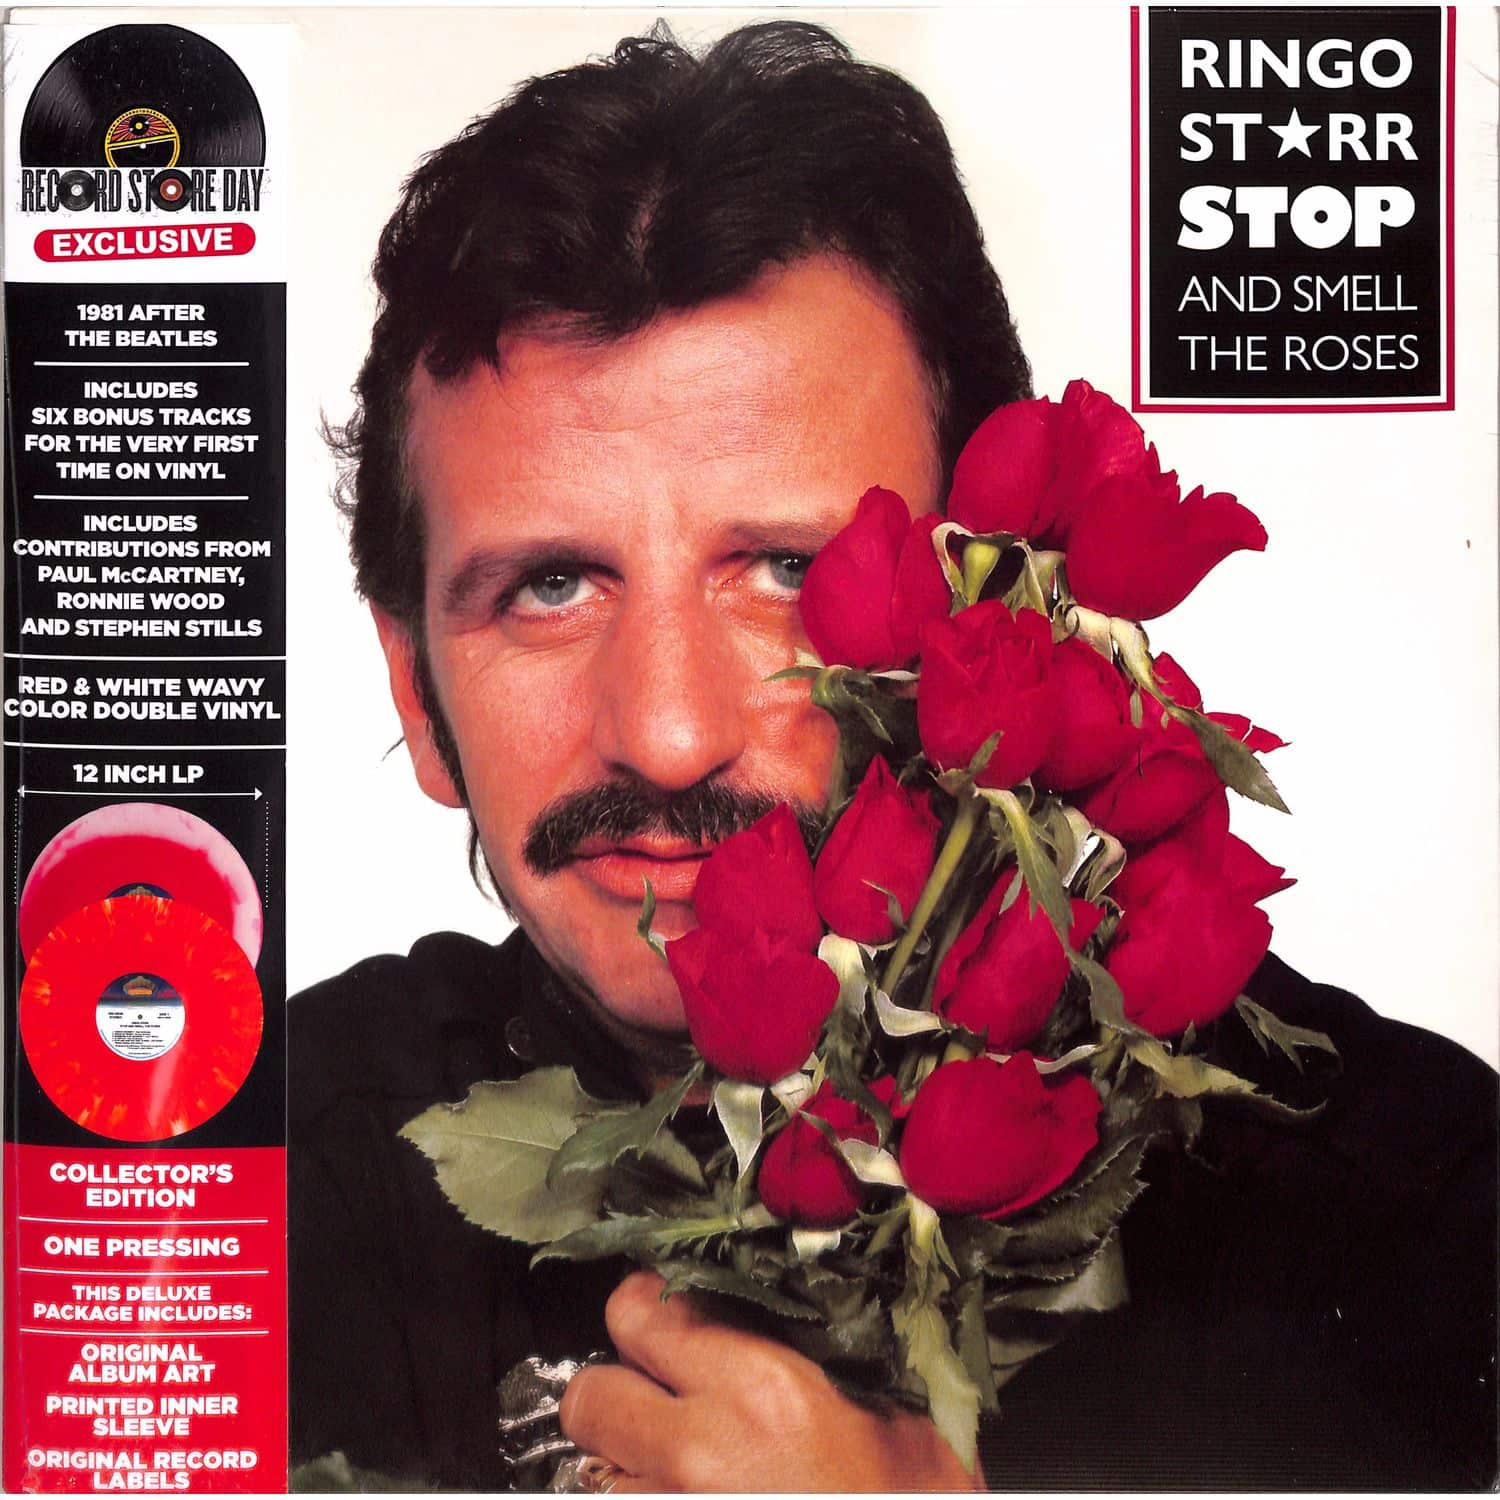 Ringo Starr - STOP AND SMELL THE ROSES 